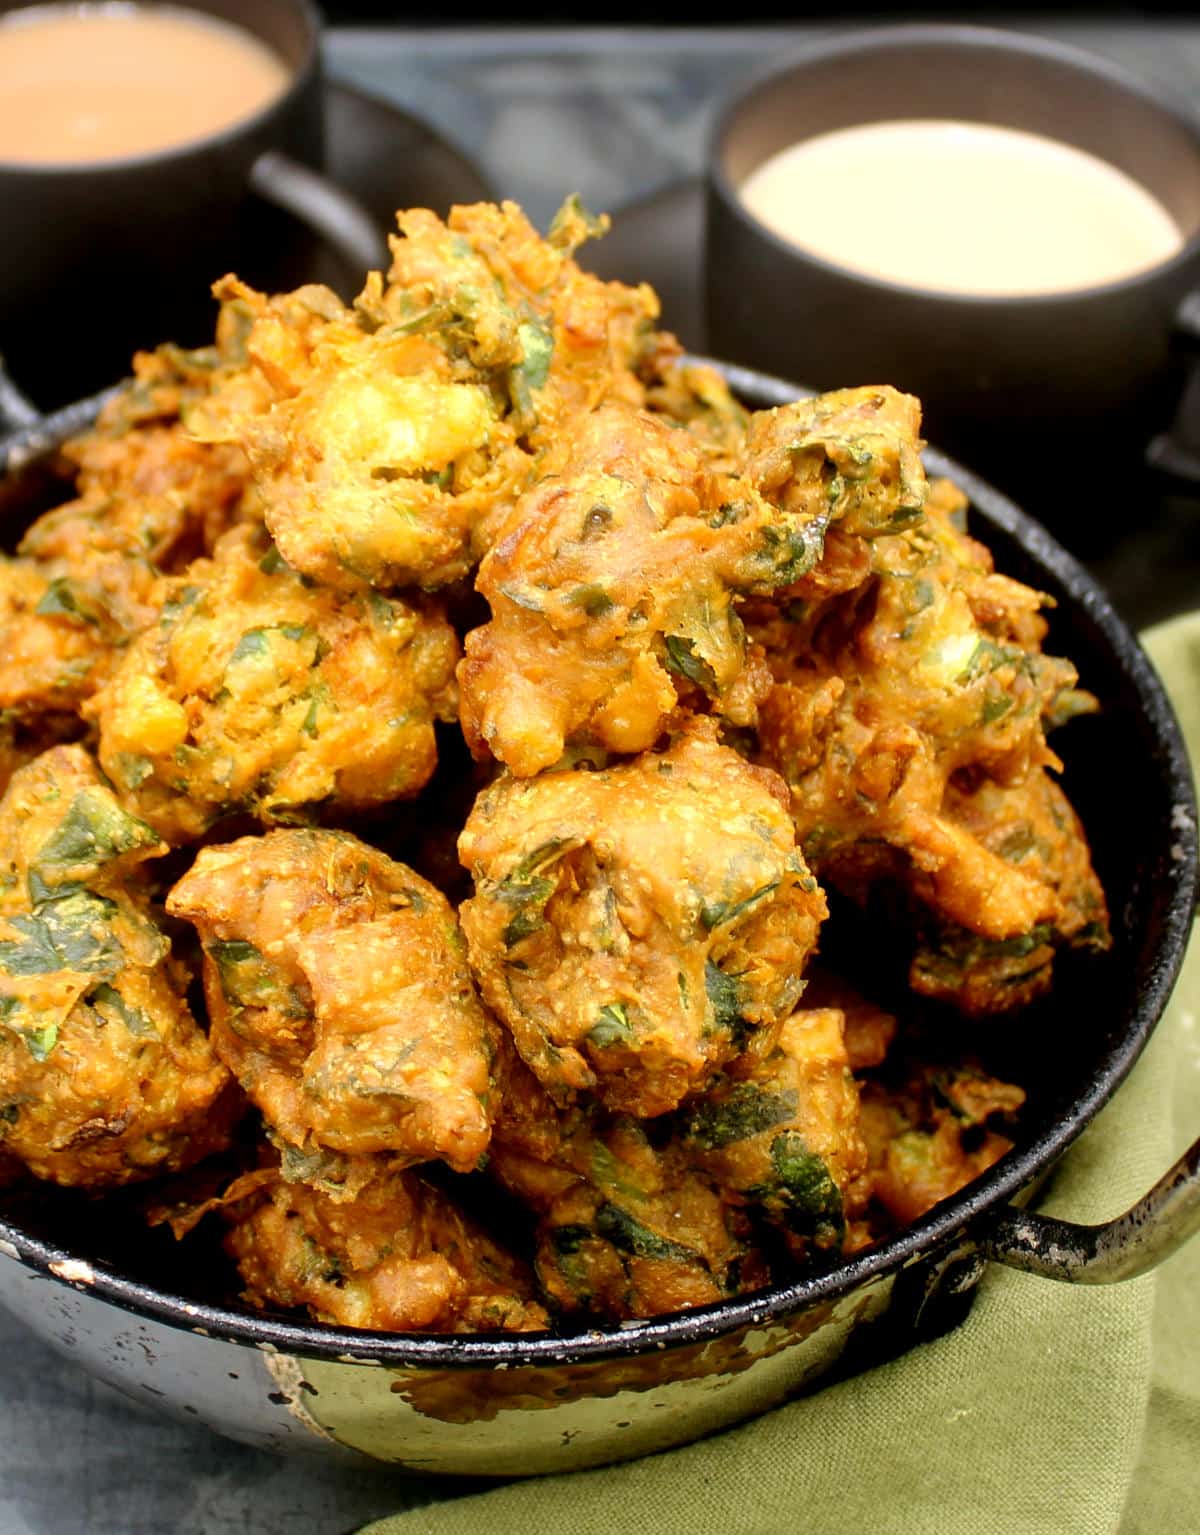 Golden, crunchy pakora fritters made with Swiss chard and onions piled in a karahi bowl with tea in background.